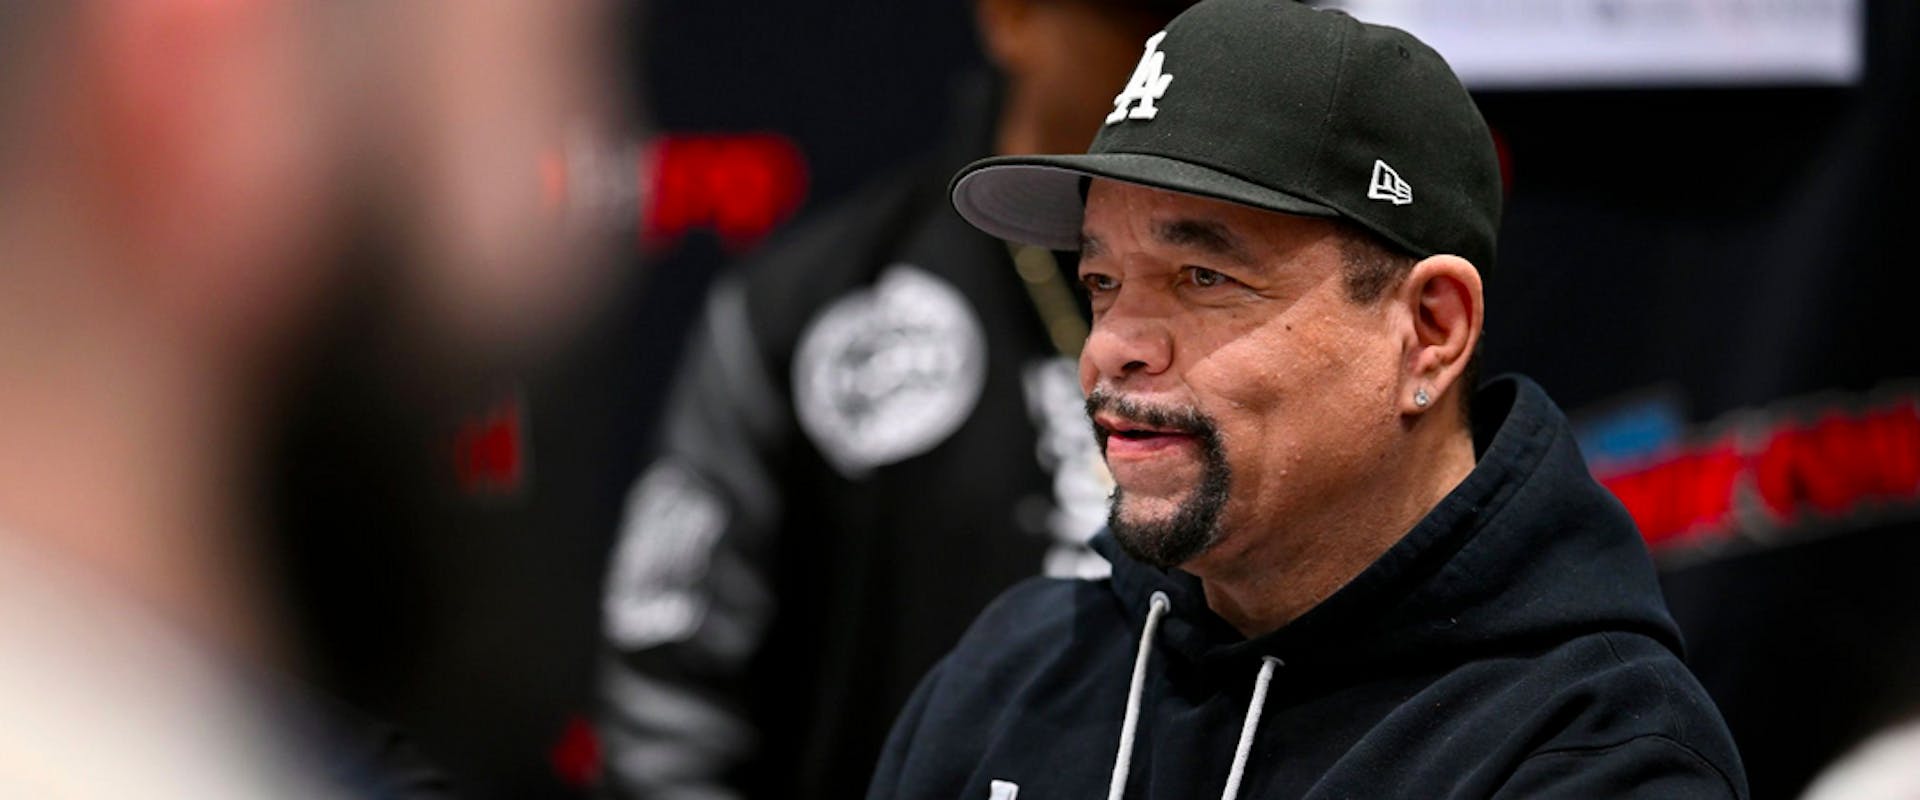 NEW YORK, NEW YORK - OCTOBER 08: Ice-T speaks to fans during New York Comic Con 2022 on October 08, 2022 in New York City. 